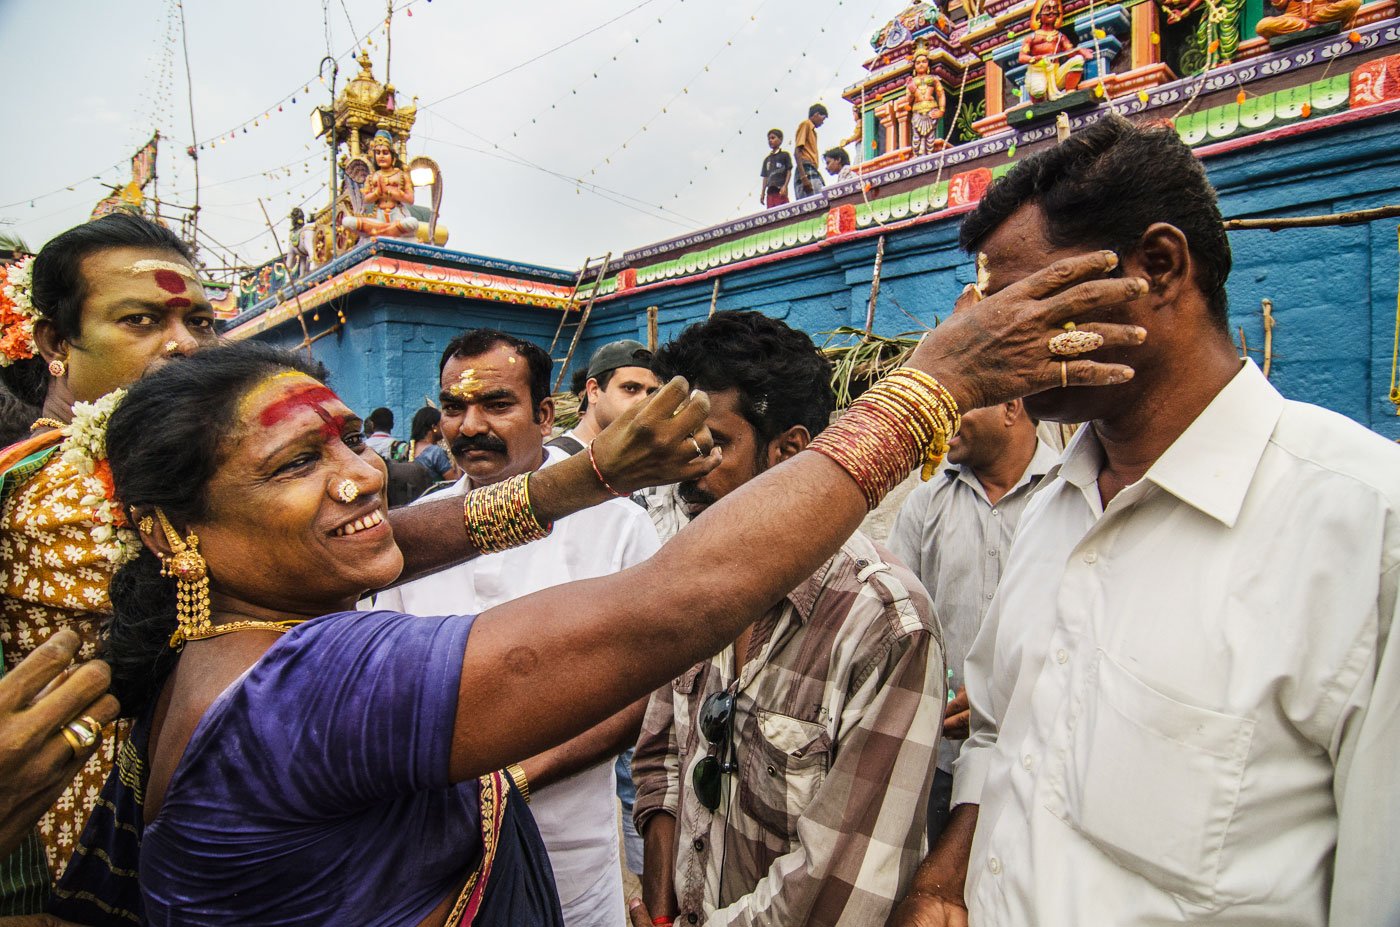 Despite the social ostracism that transgender women face, people also regard them as ‘lucky’. They gather outside the Koothandavar temple to receive blessings from aravanis. 